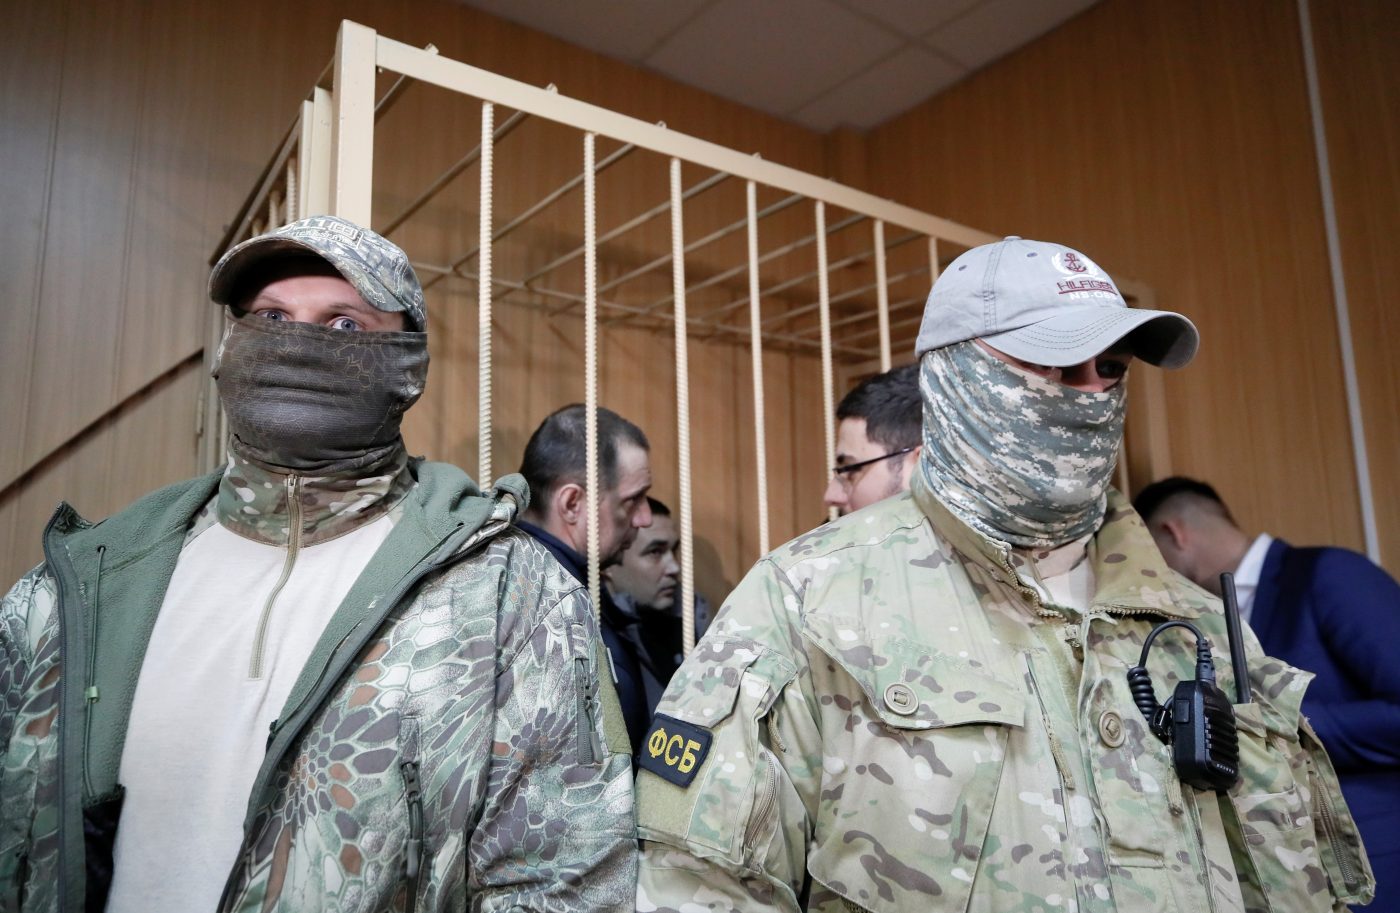 Photo: Officers of Russia's FSB security service stand guard near a defendants' cage, with detained crew members of Ukrainian naval ships inside, during a court hearing in Moscow, Russia January 15, 2019. Credit: REUTERS/Maxim Shemetov